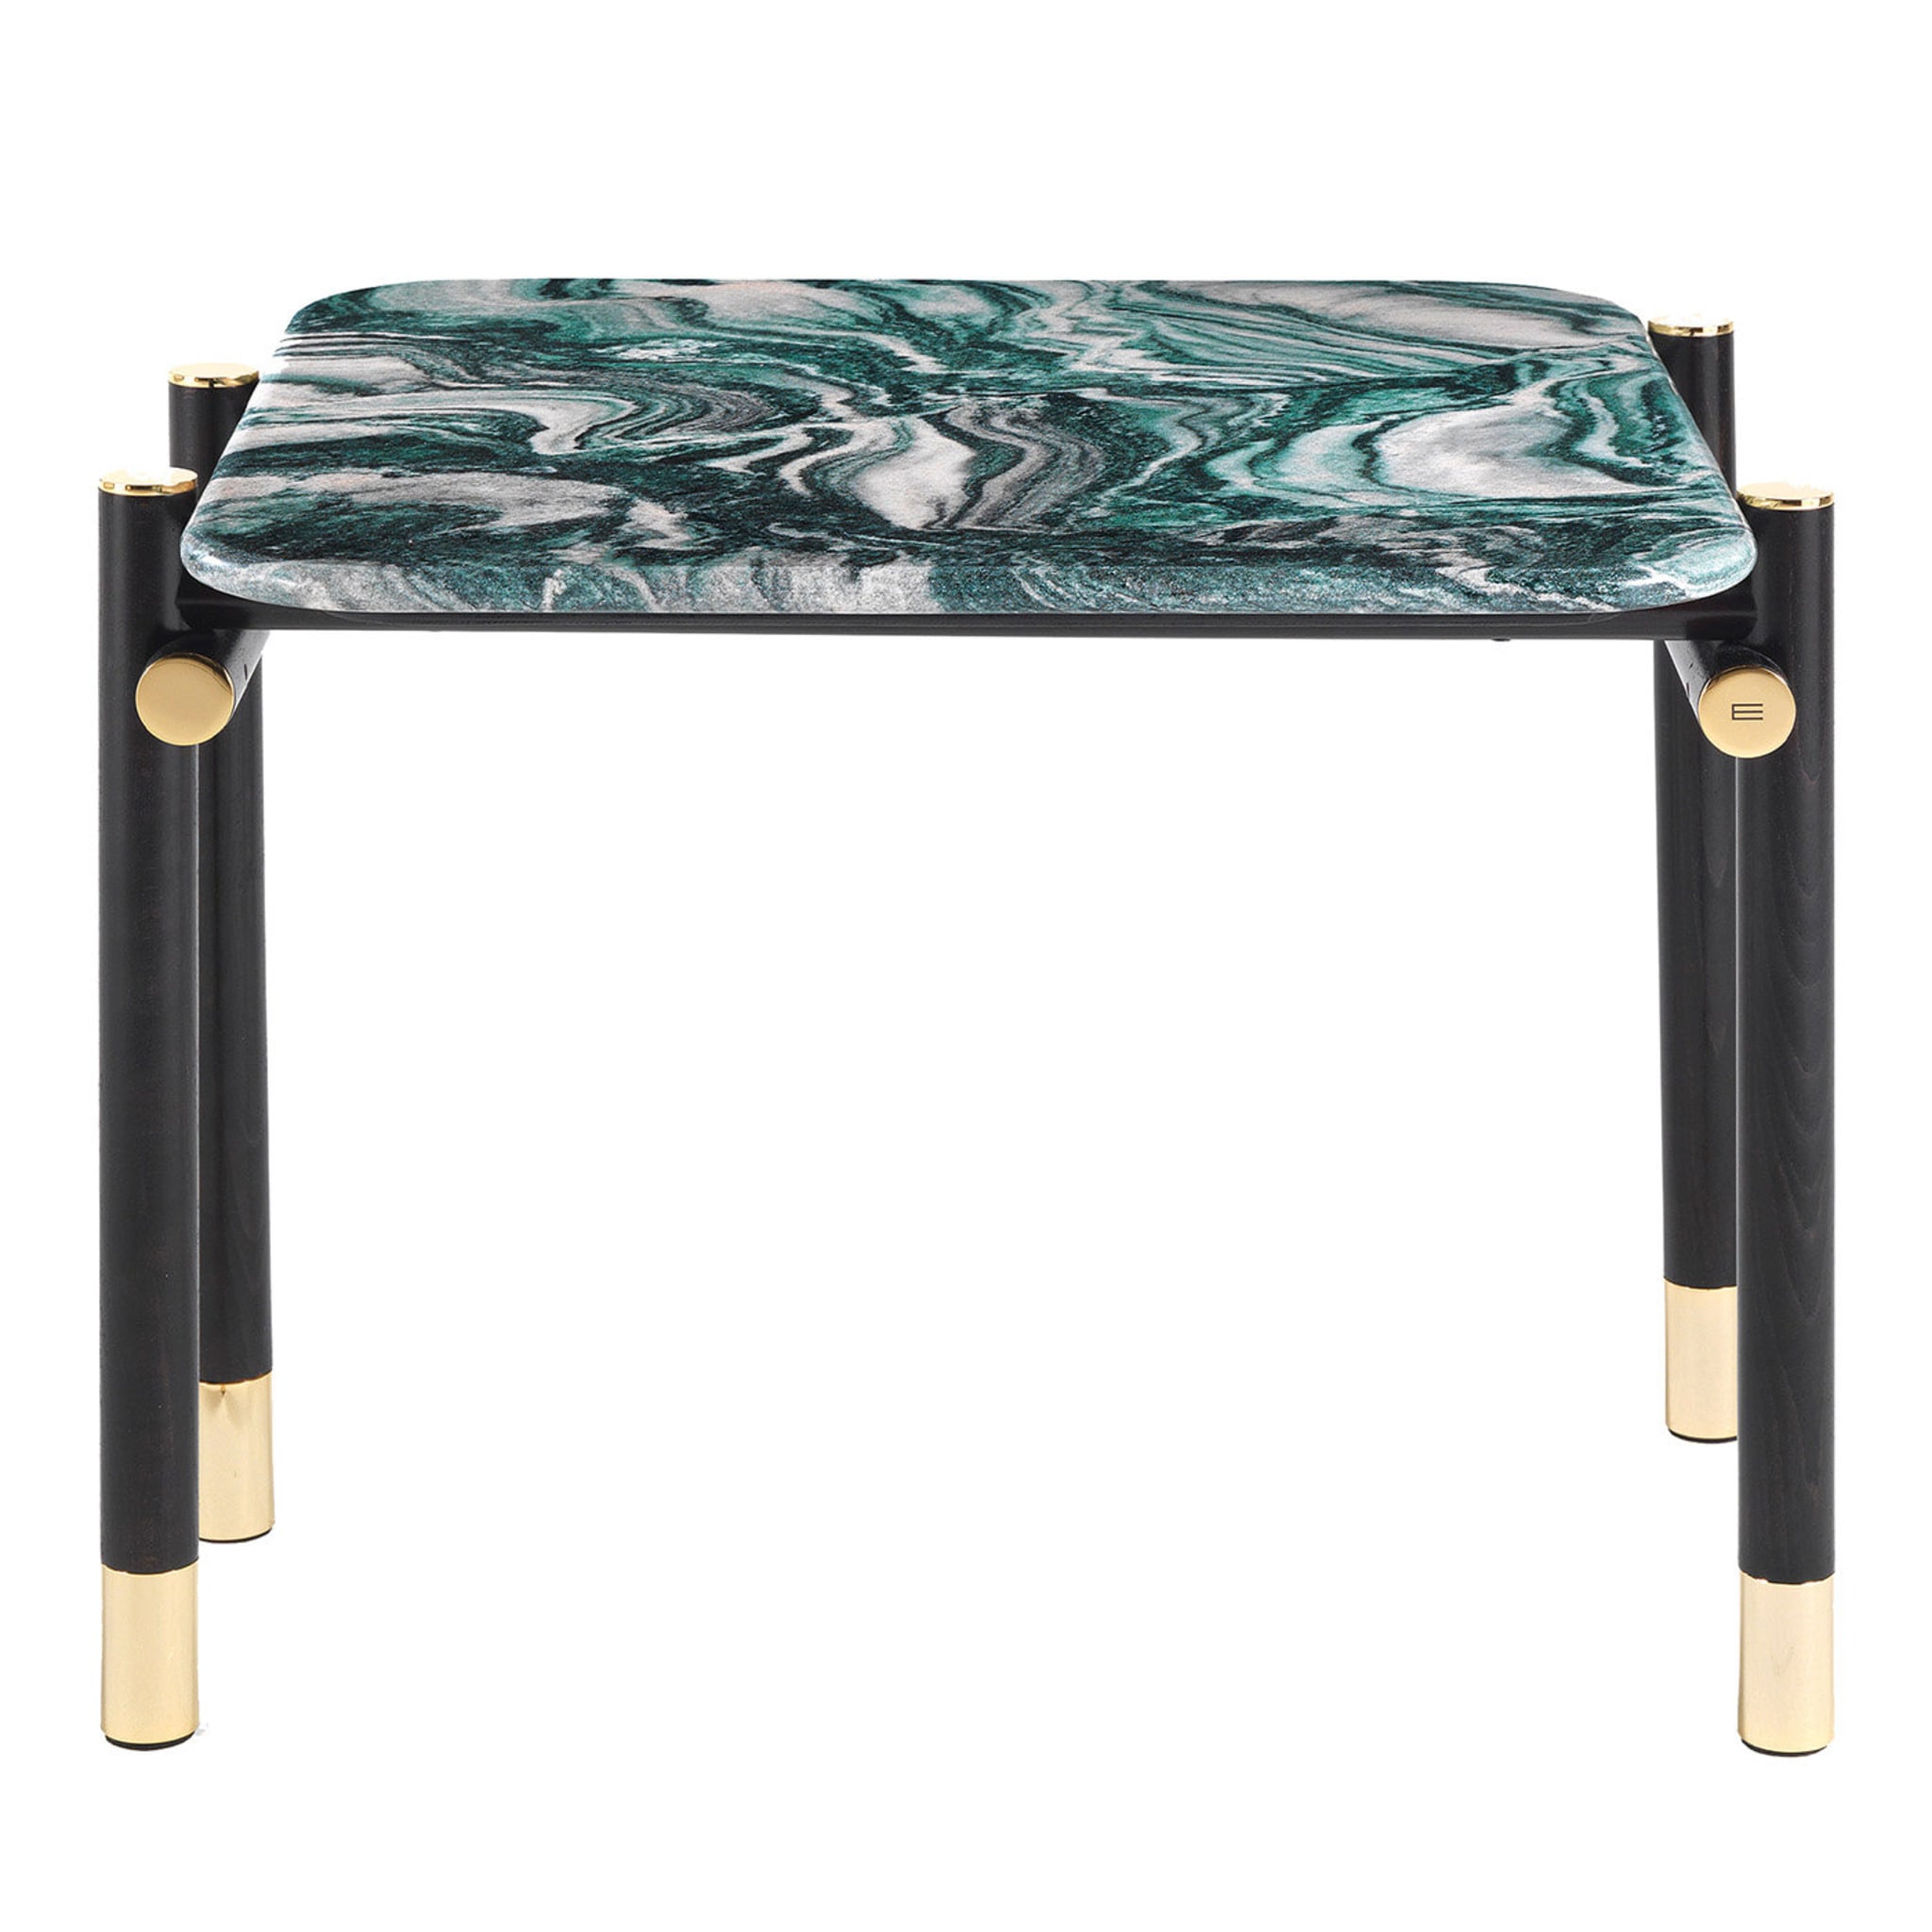 Woodstock Polar Green Side Table - Main view